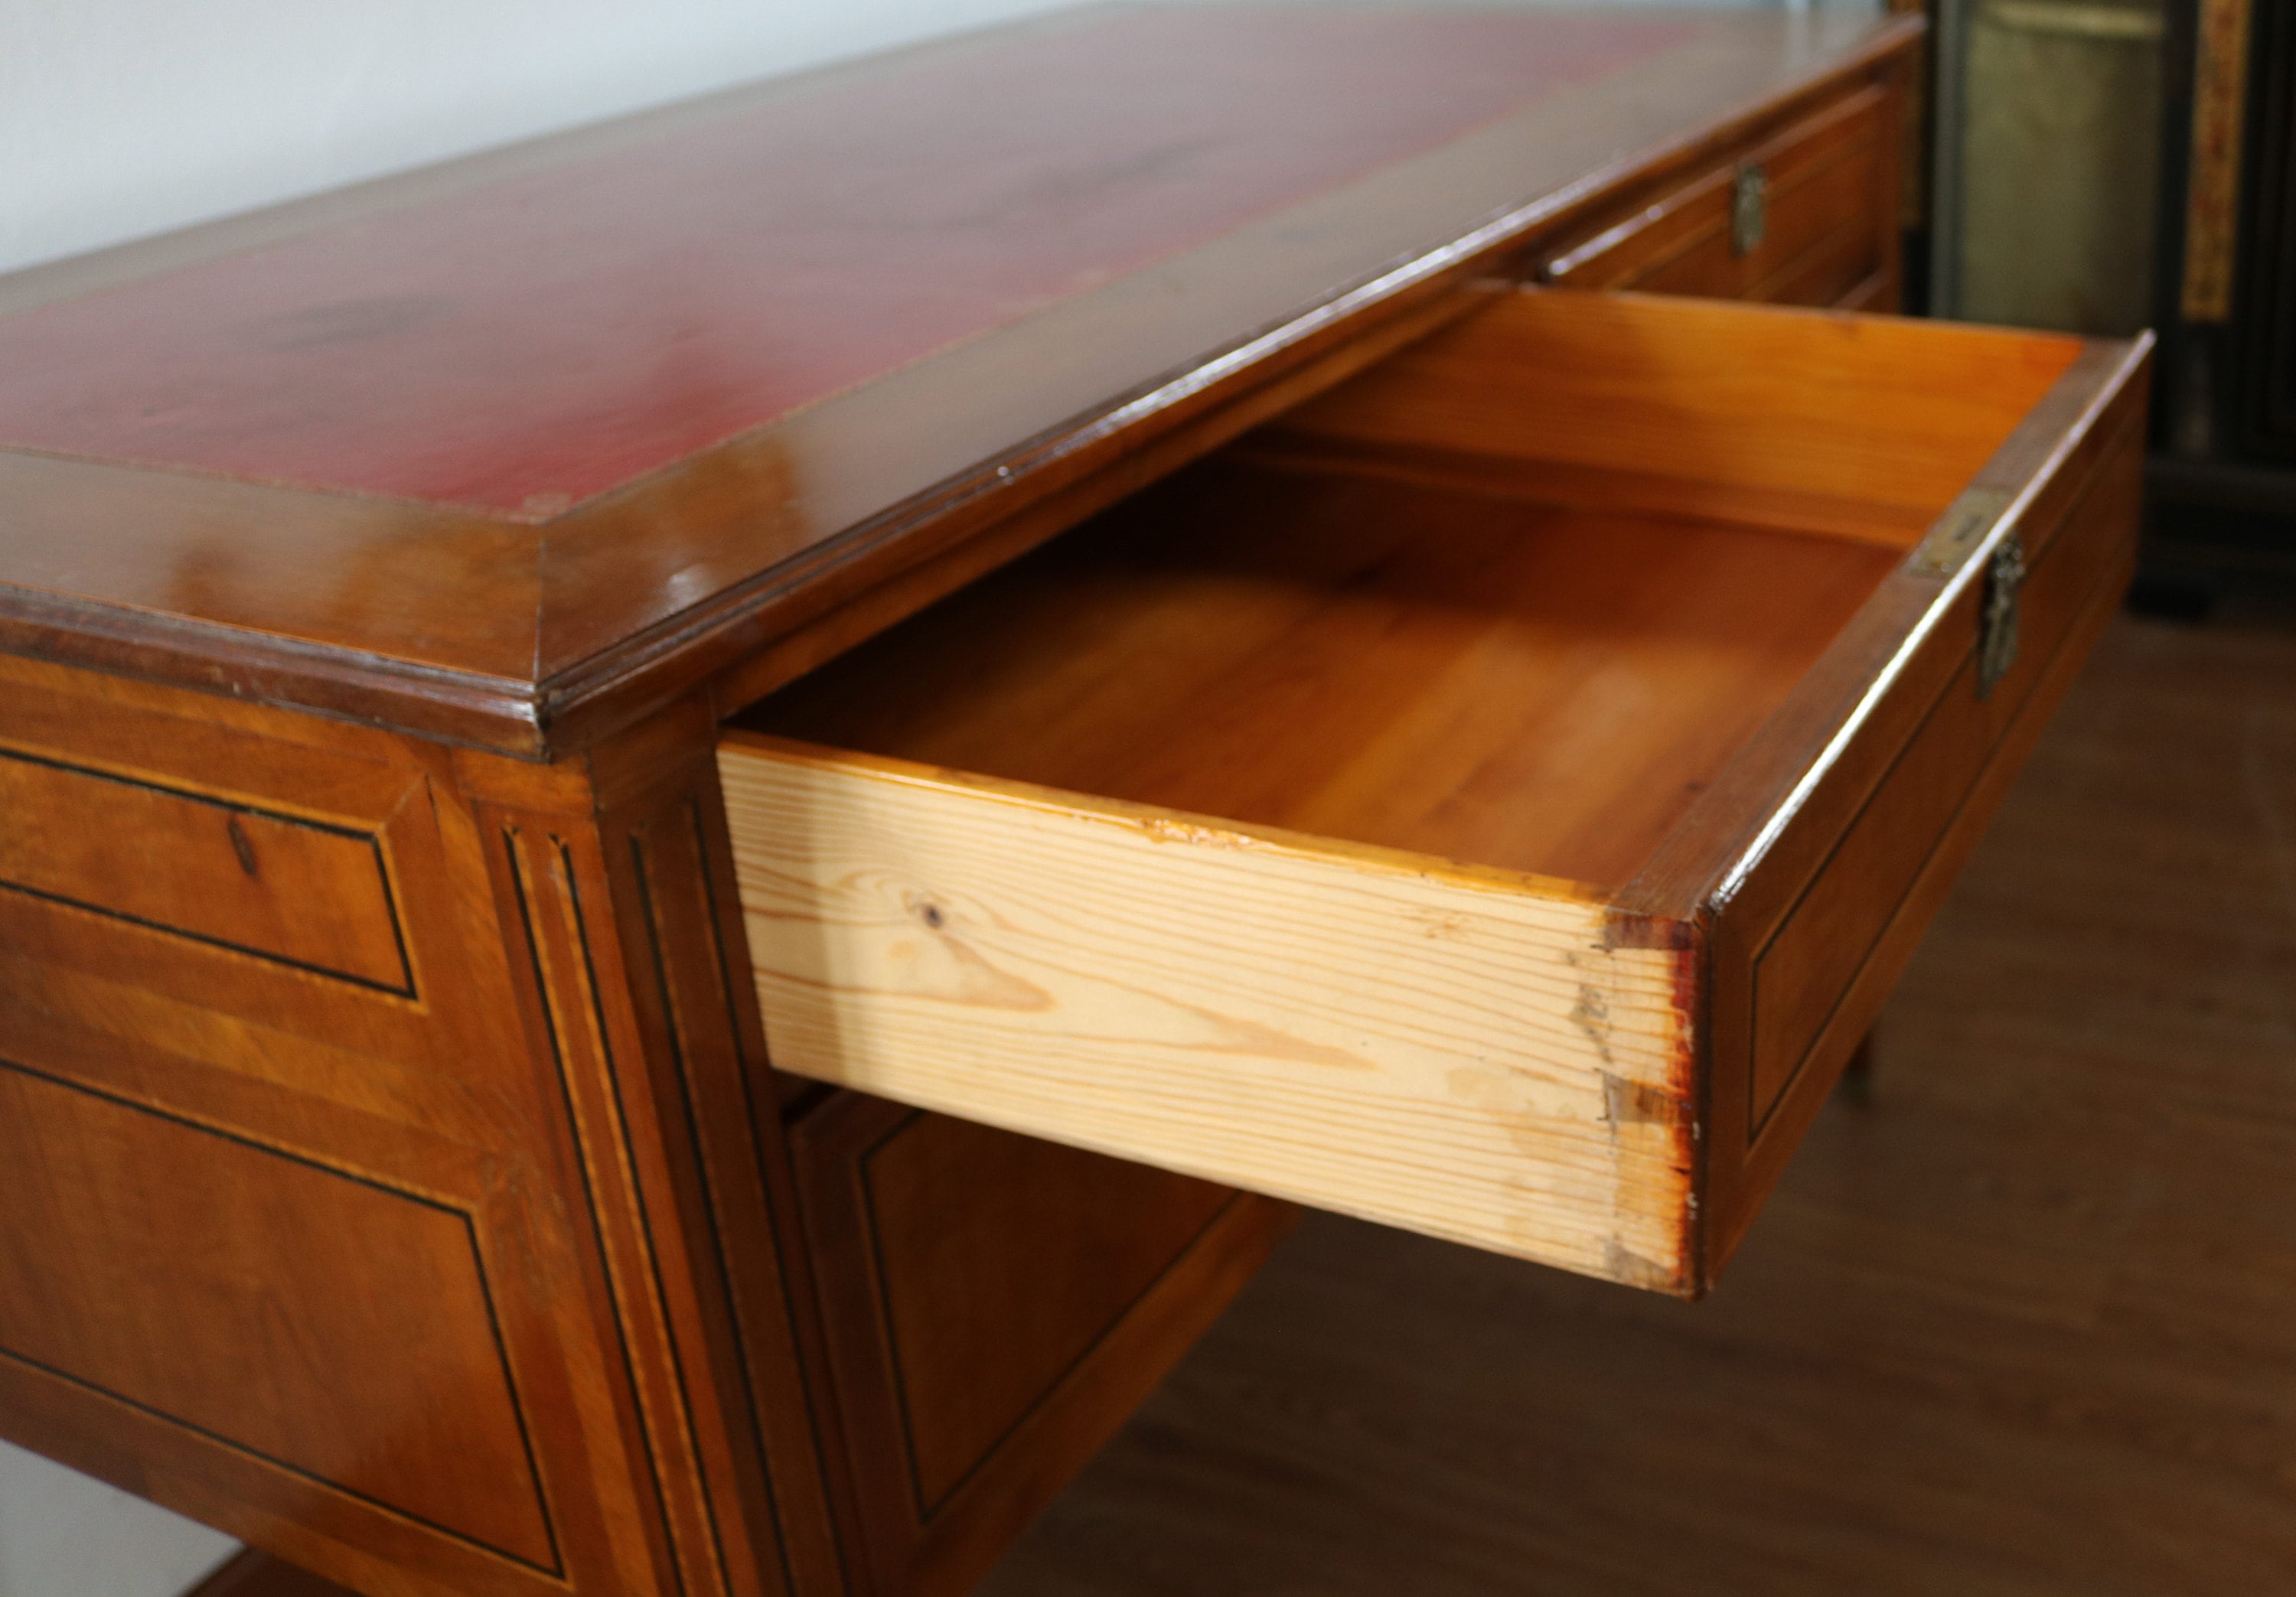 French Writing Desk with Embossed Leather Top in the Style of Louis XVI —  South Loop Loft